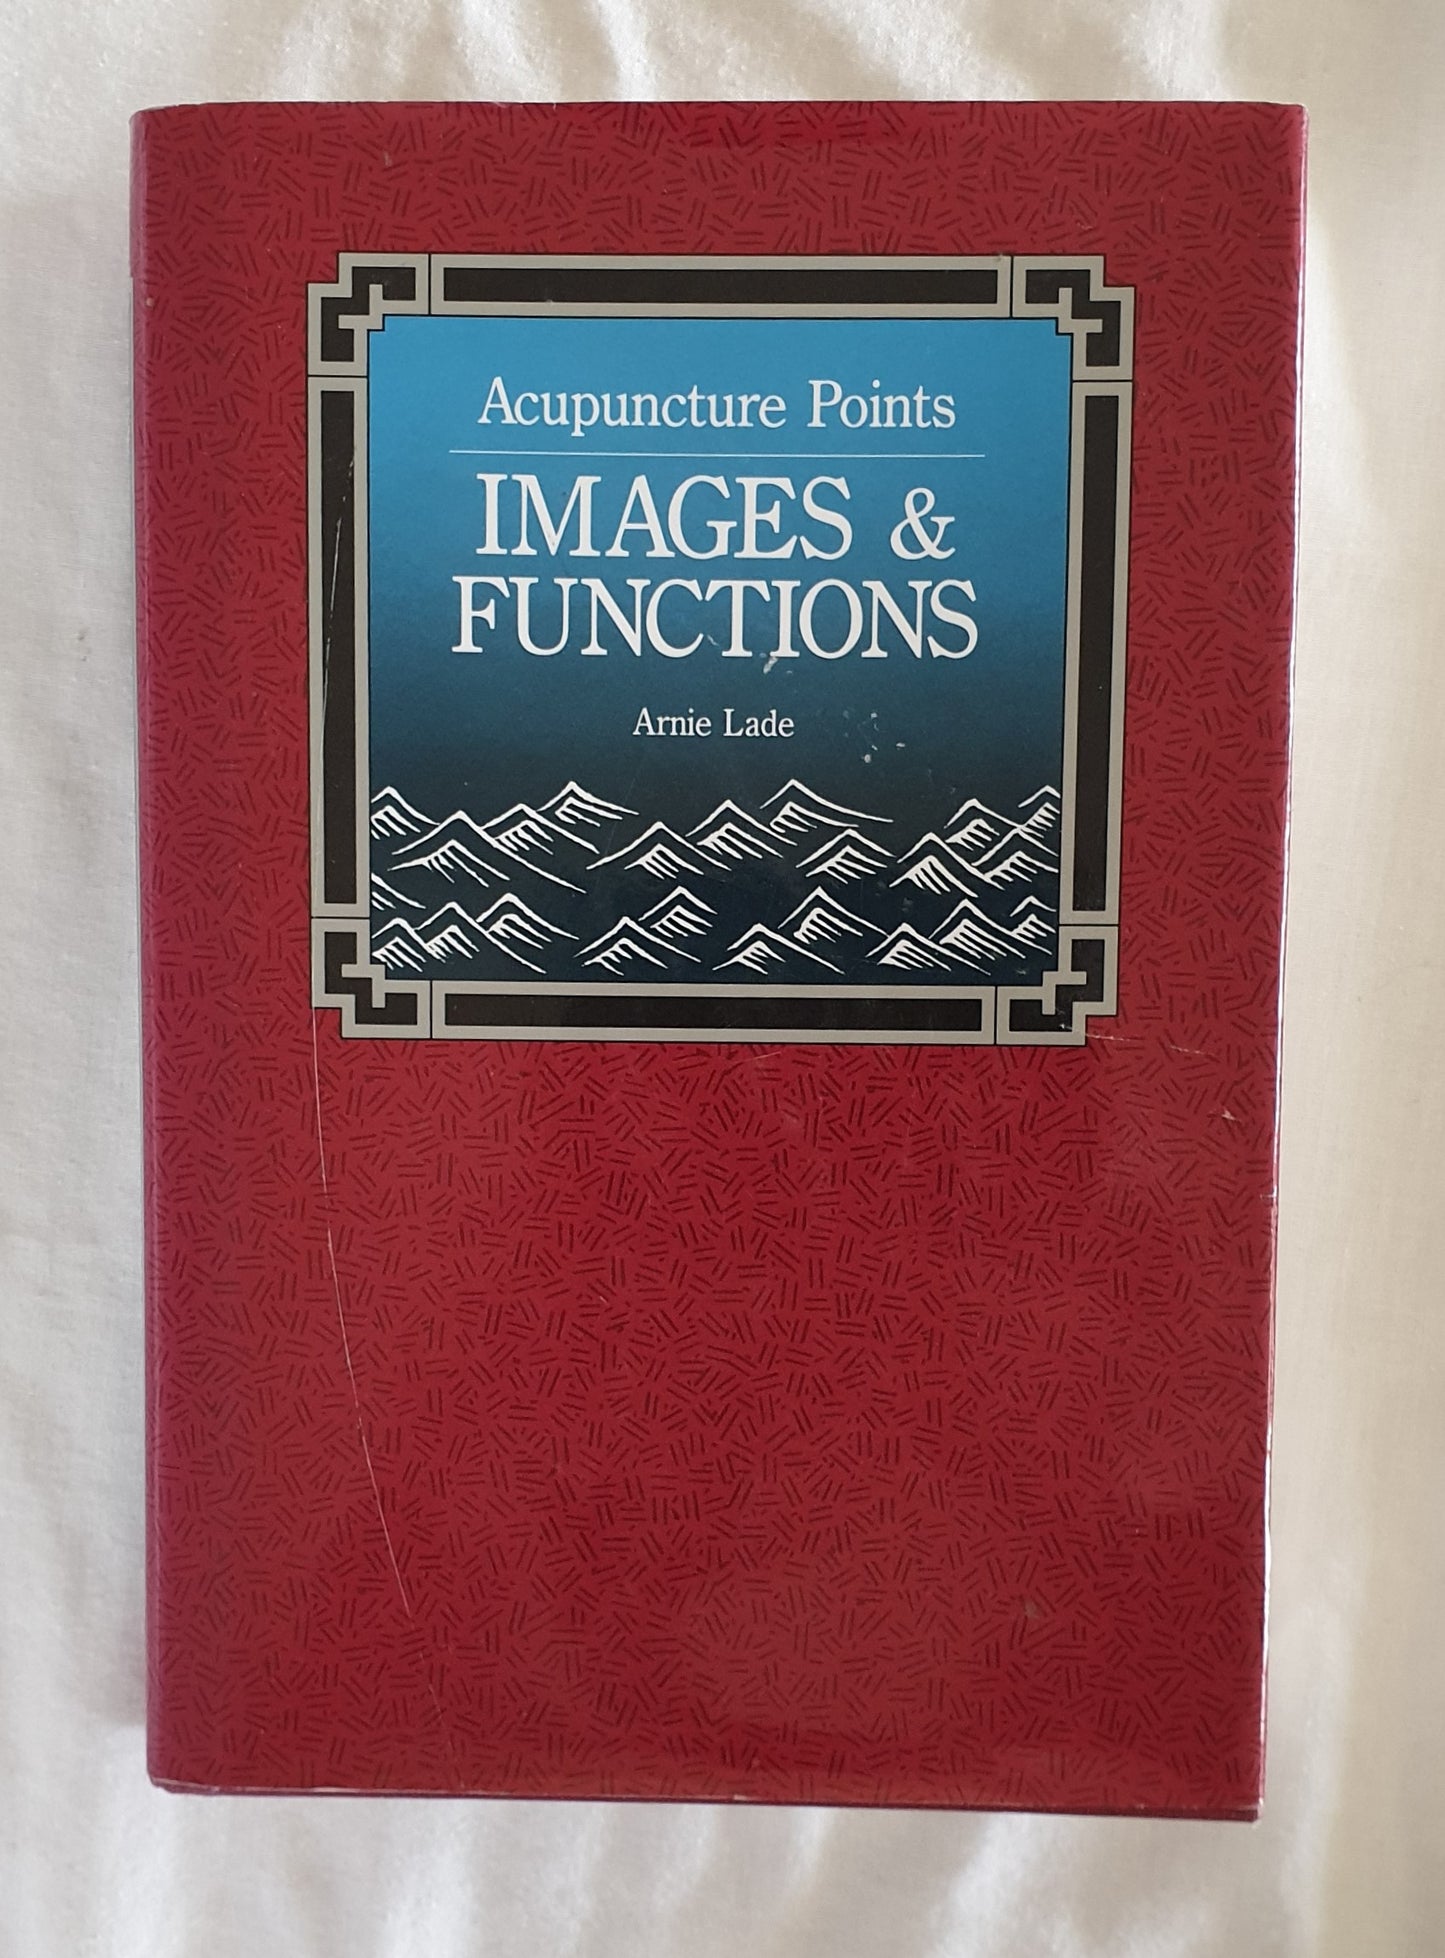 Acupuncture Points Images & Functions by Arnie Lade